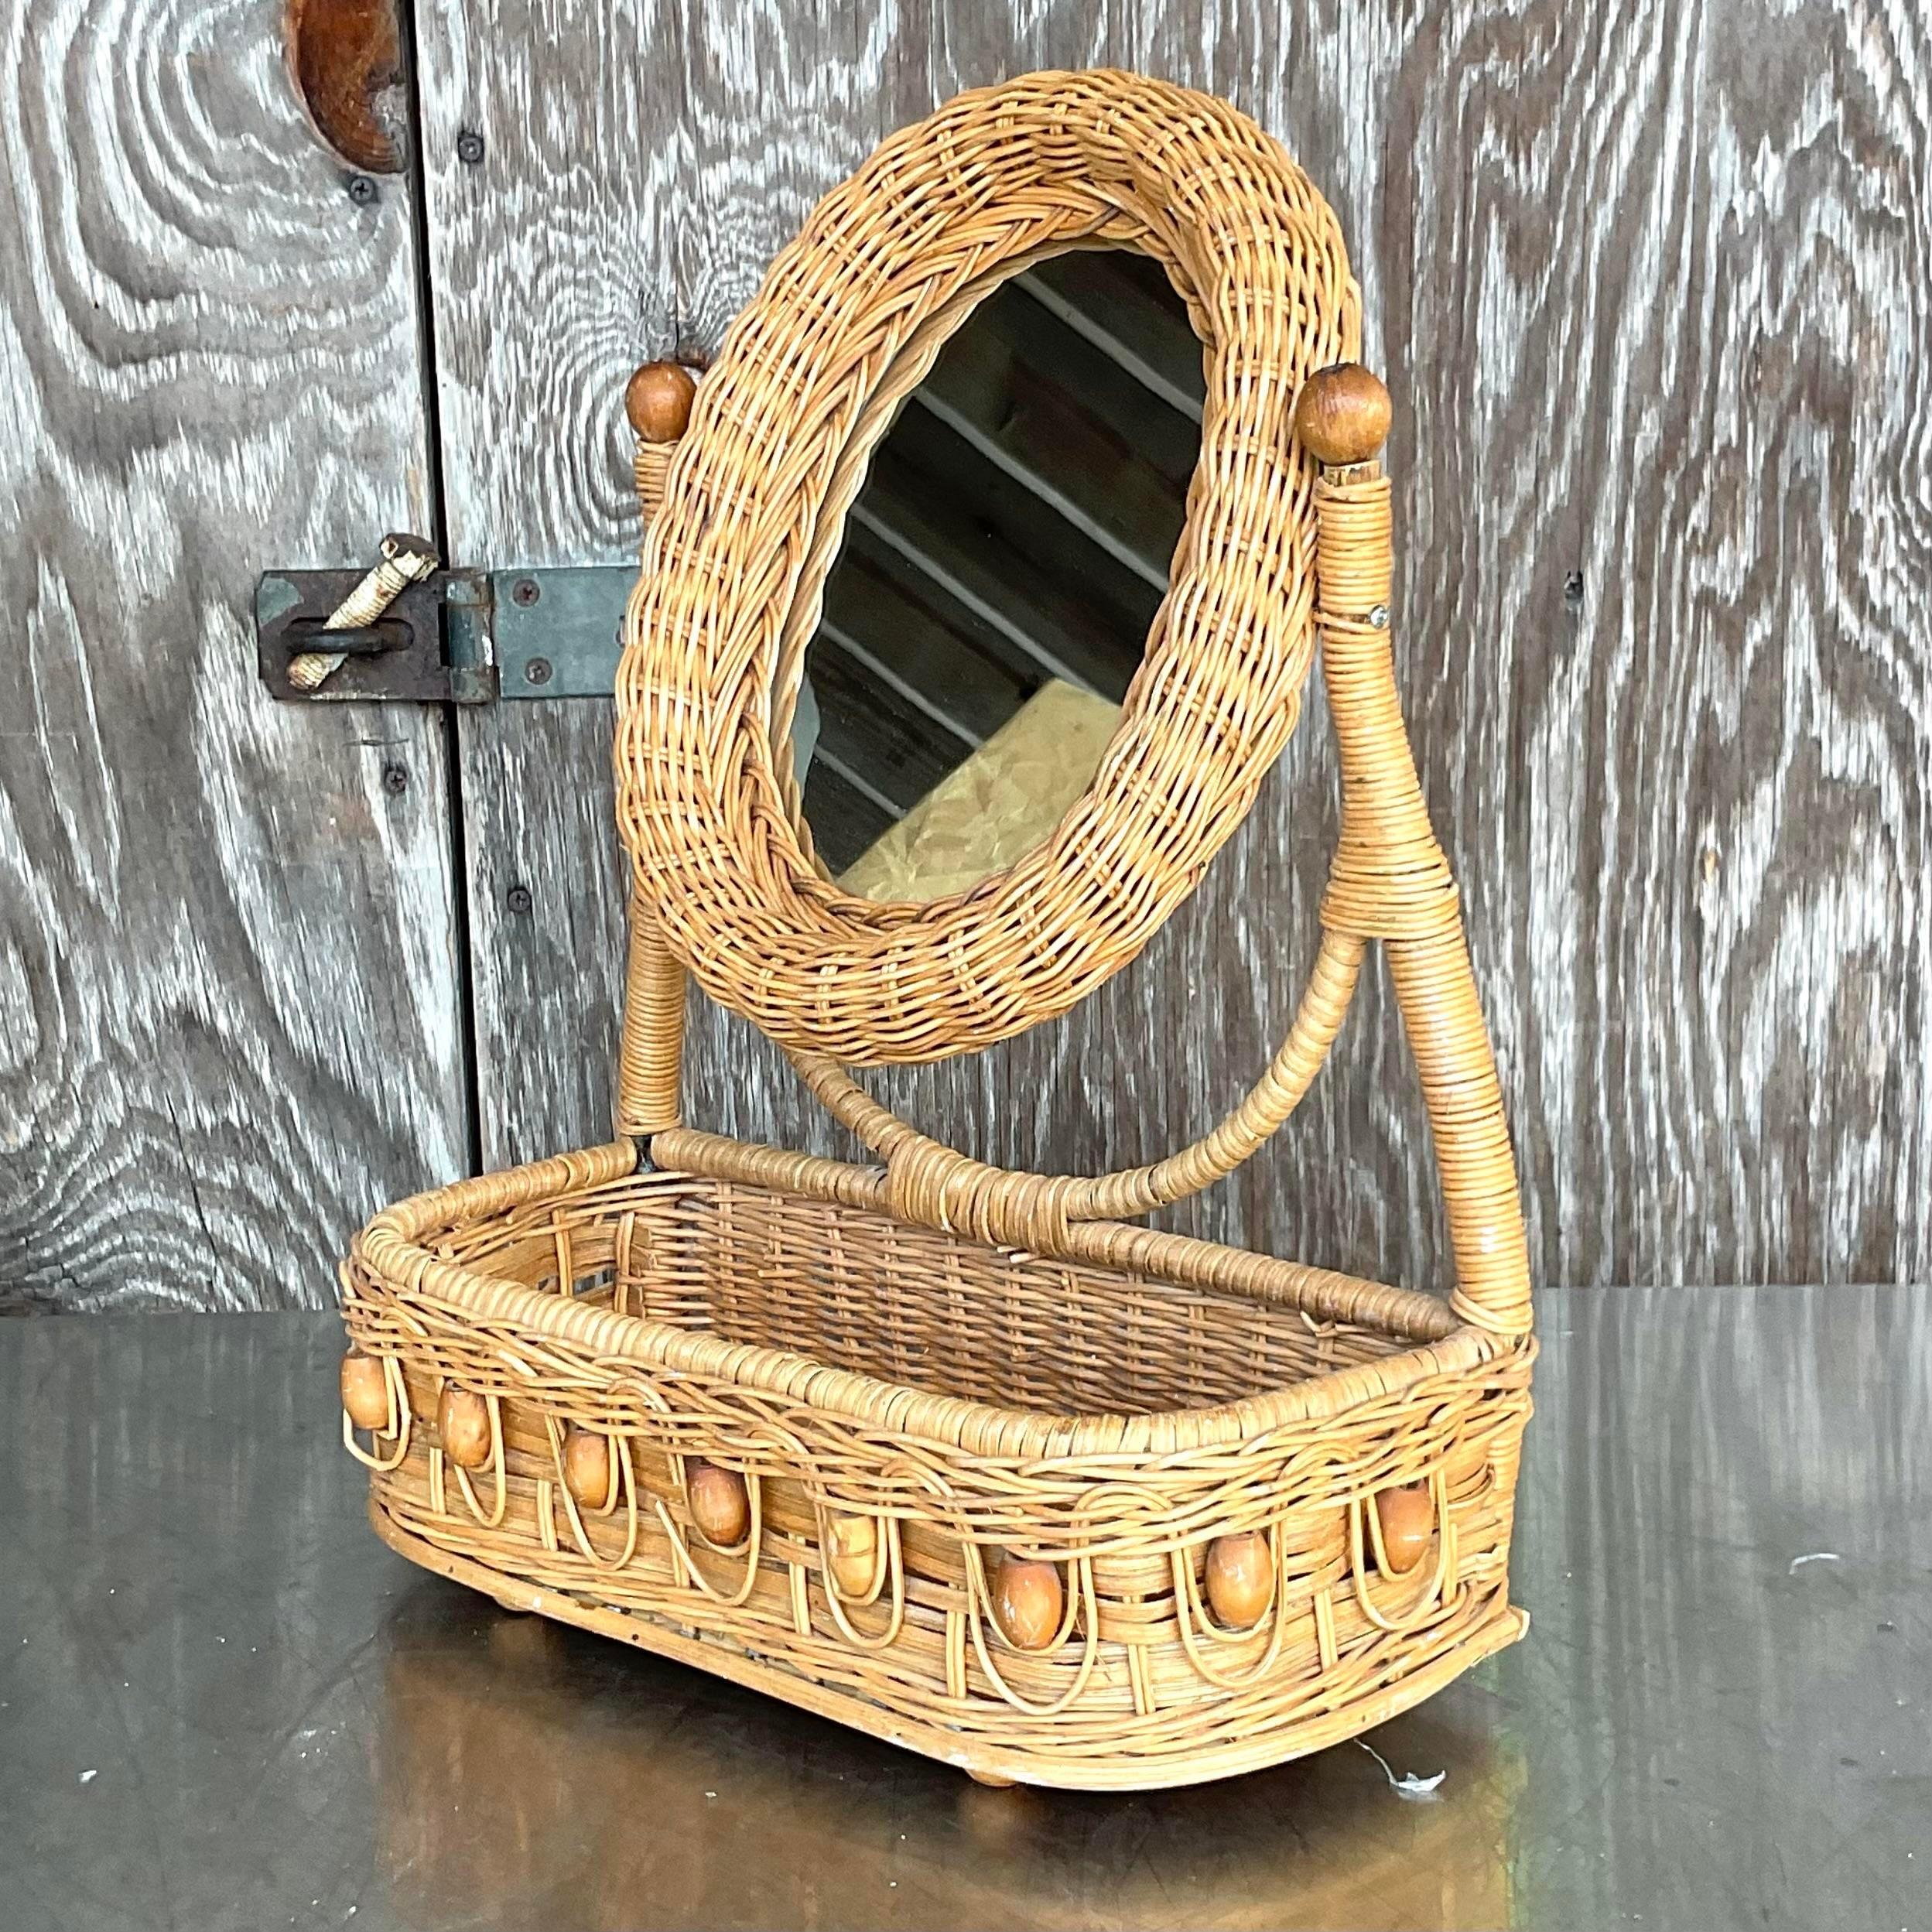 A fabulous little table top mirror. A chic woven rattan with a row of wooden beads for fun! A little attached basket for storage. Acquired from a Palm Beach estate.